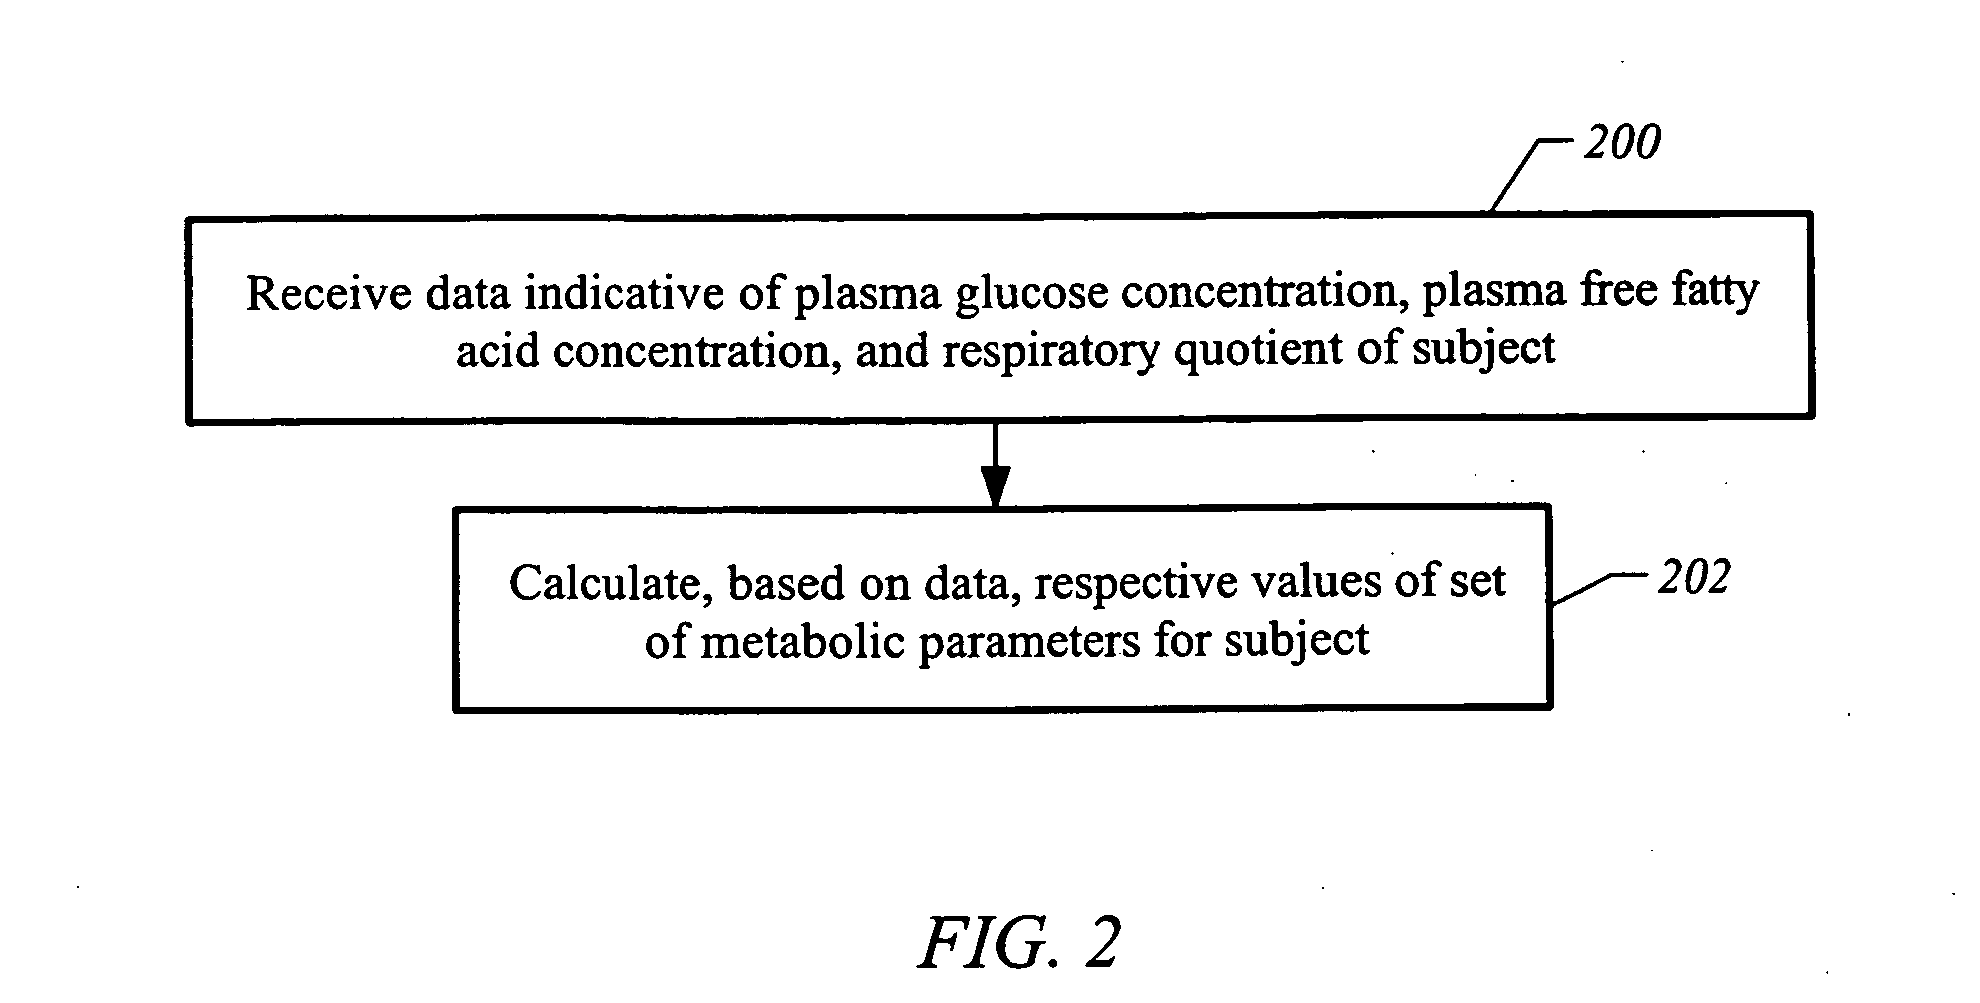 Apparatus and methods for assessing metabolic substrate utilization